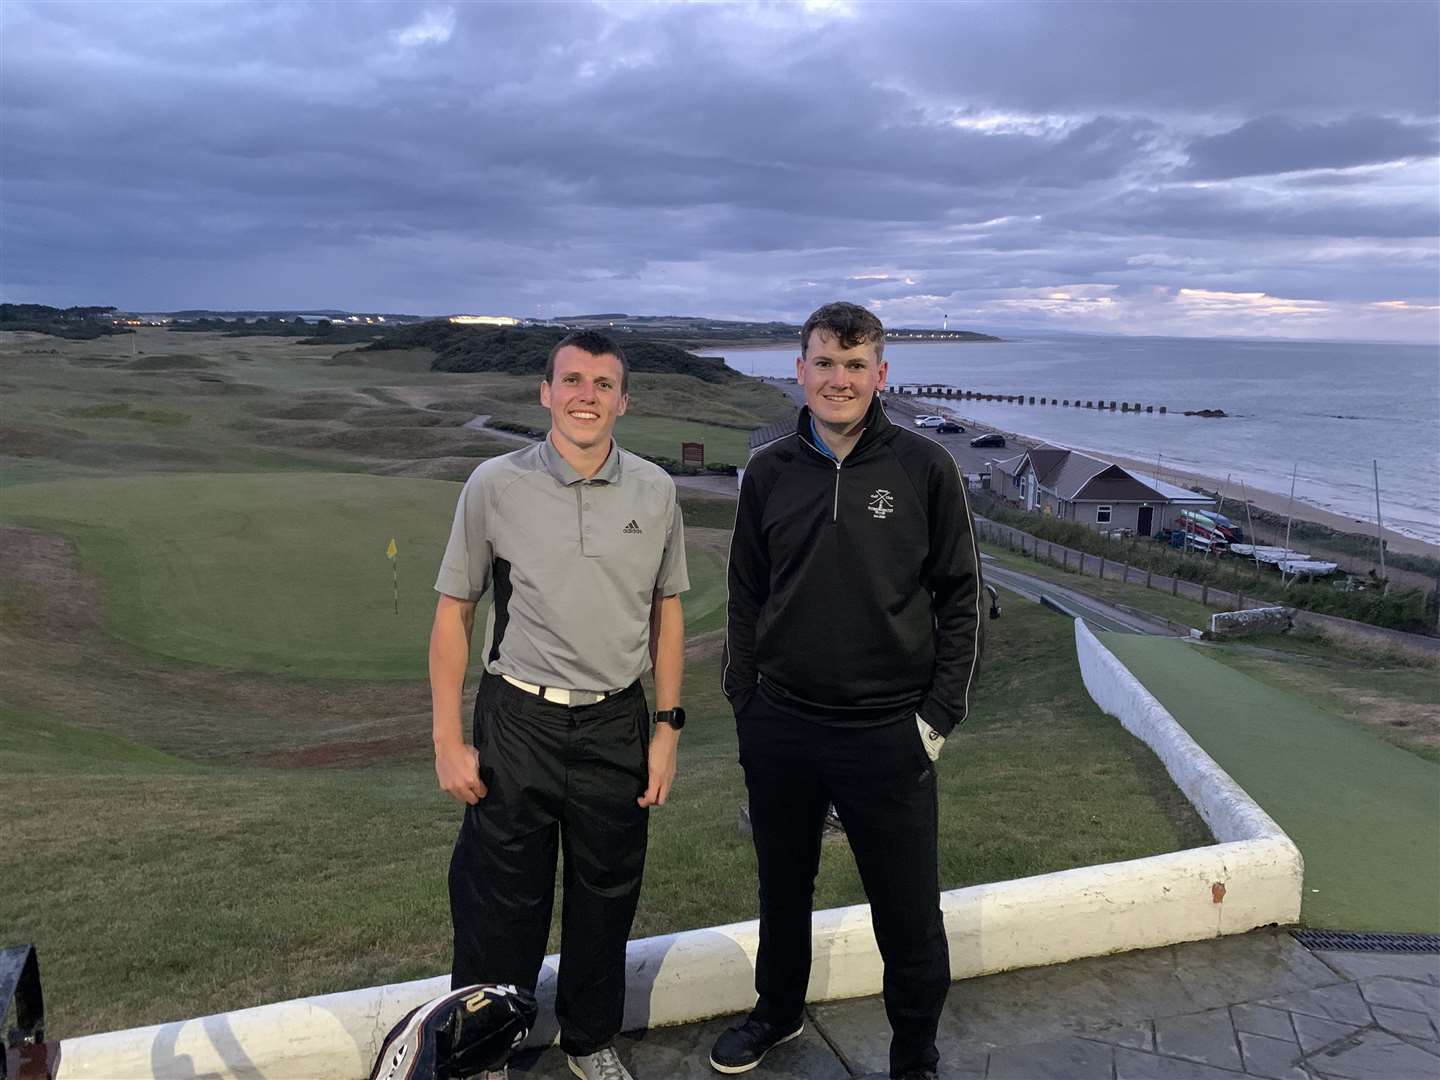 Aaron Stewart (left, from Lossie) and Scott Lorimer (right, from Montrose) finished 18 hours of golf just before dark at Moray Golf Club.